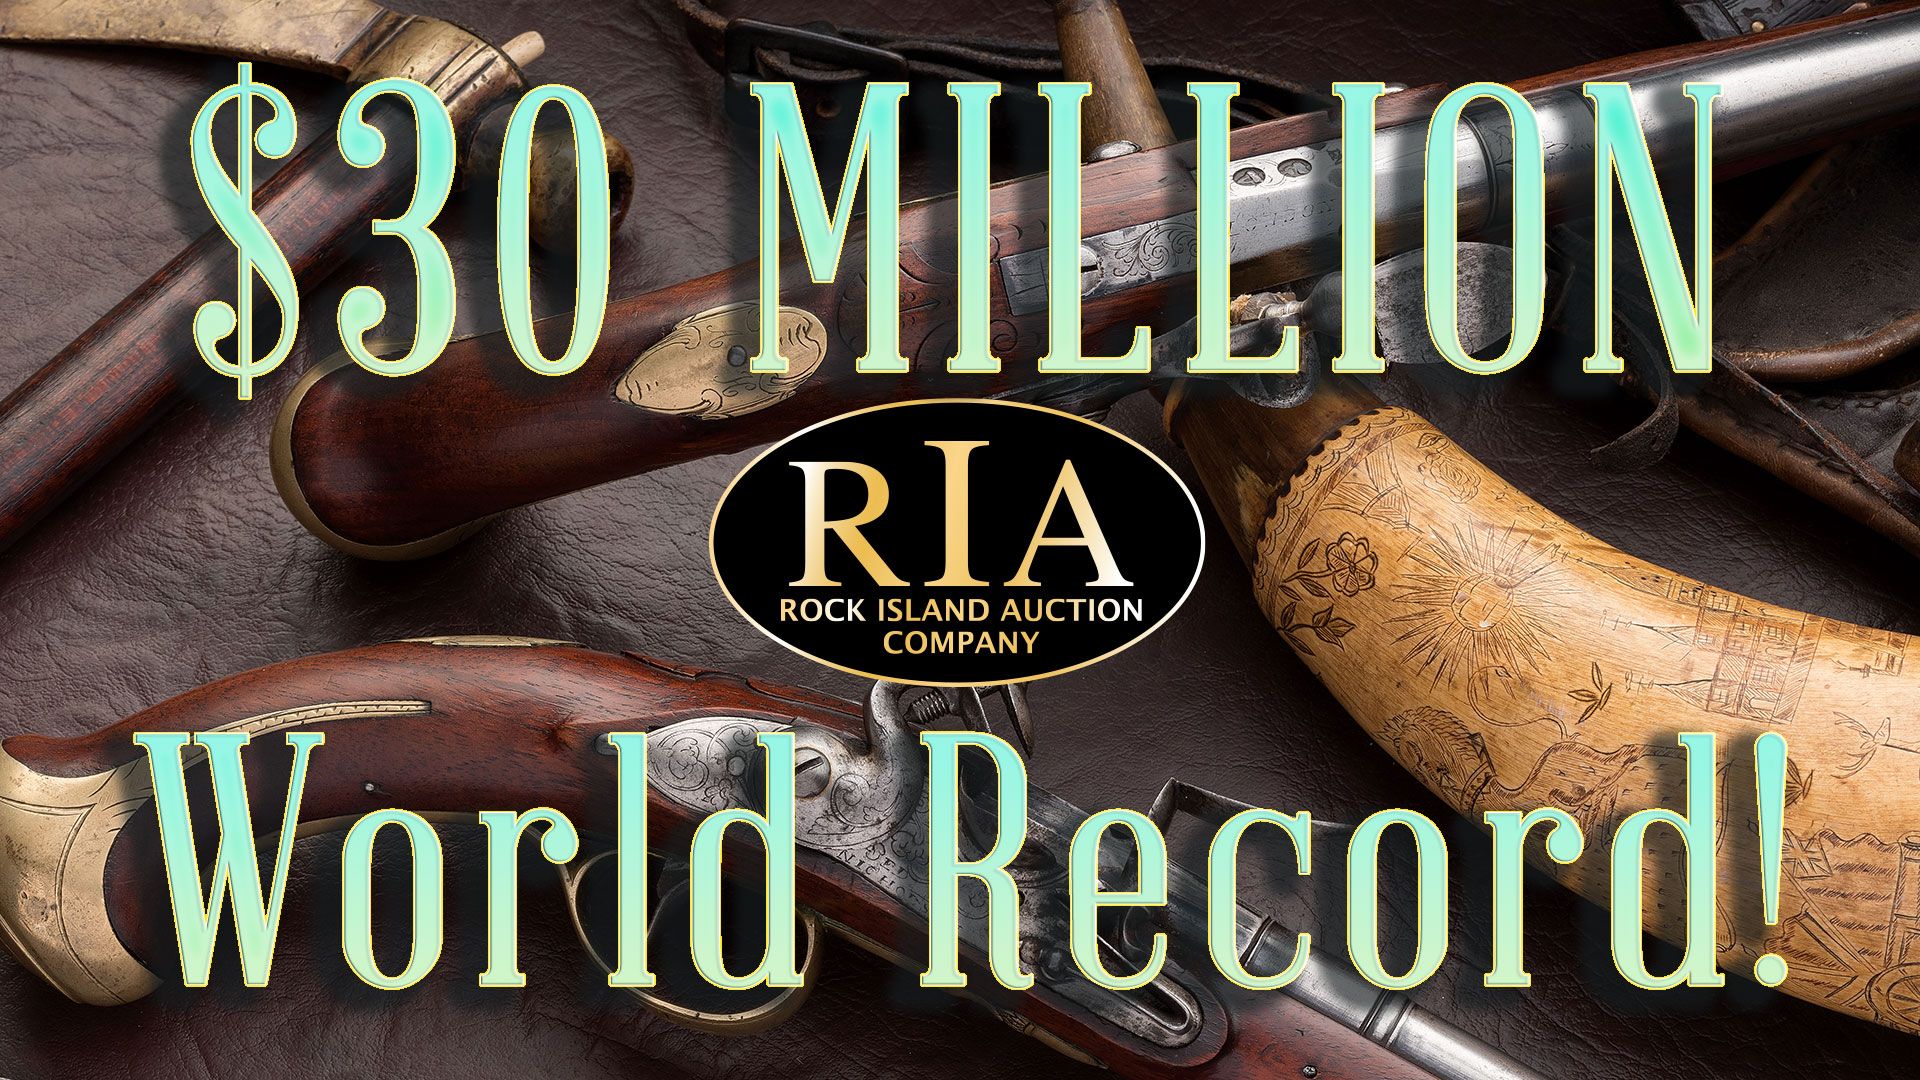 The Sale of the Century Rolls On with an Earth-Shattering $30 MILLION World Record!